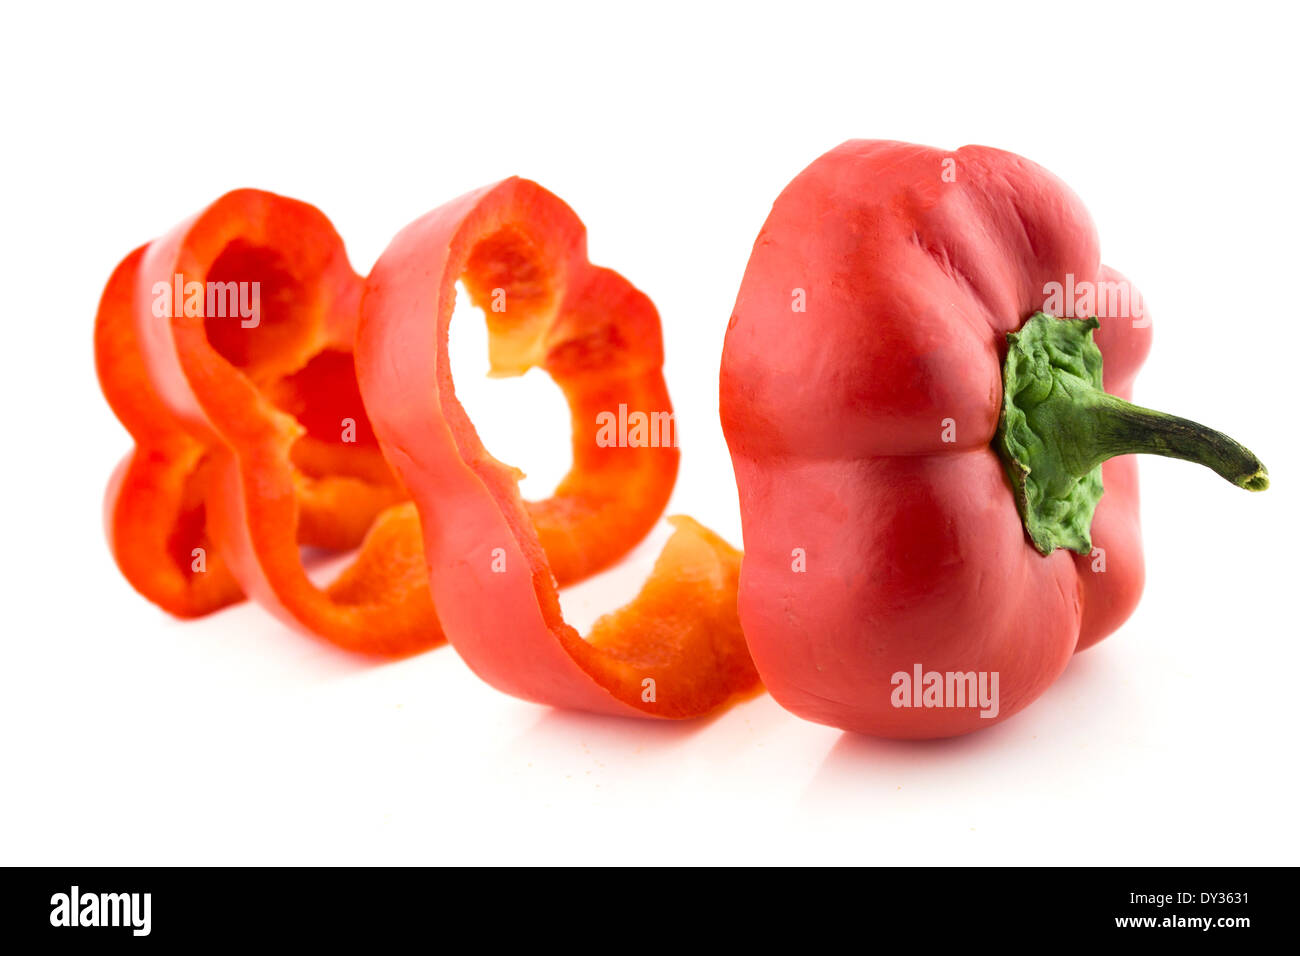 sweet red bell pepper on white background. Stock Photo